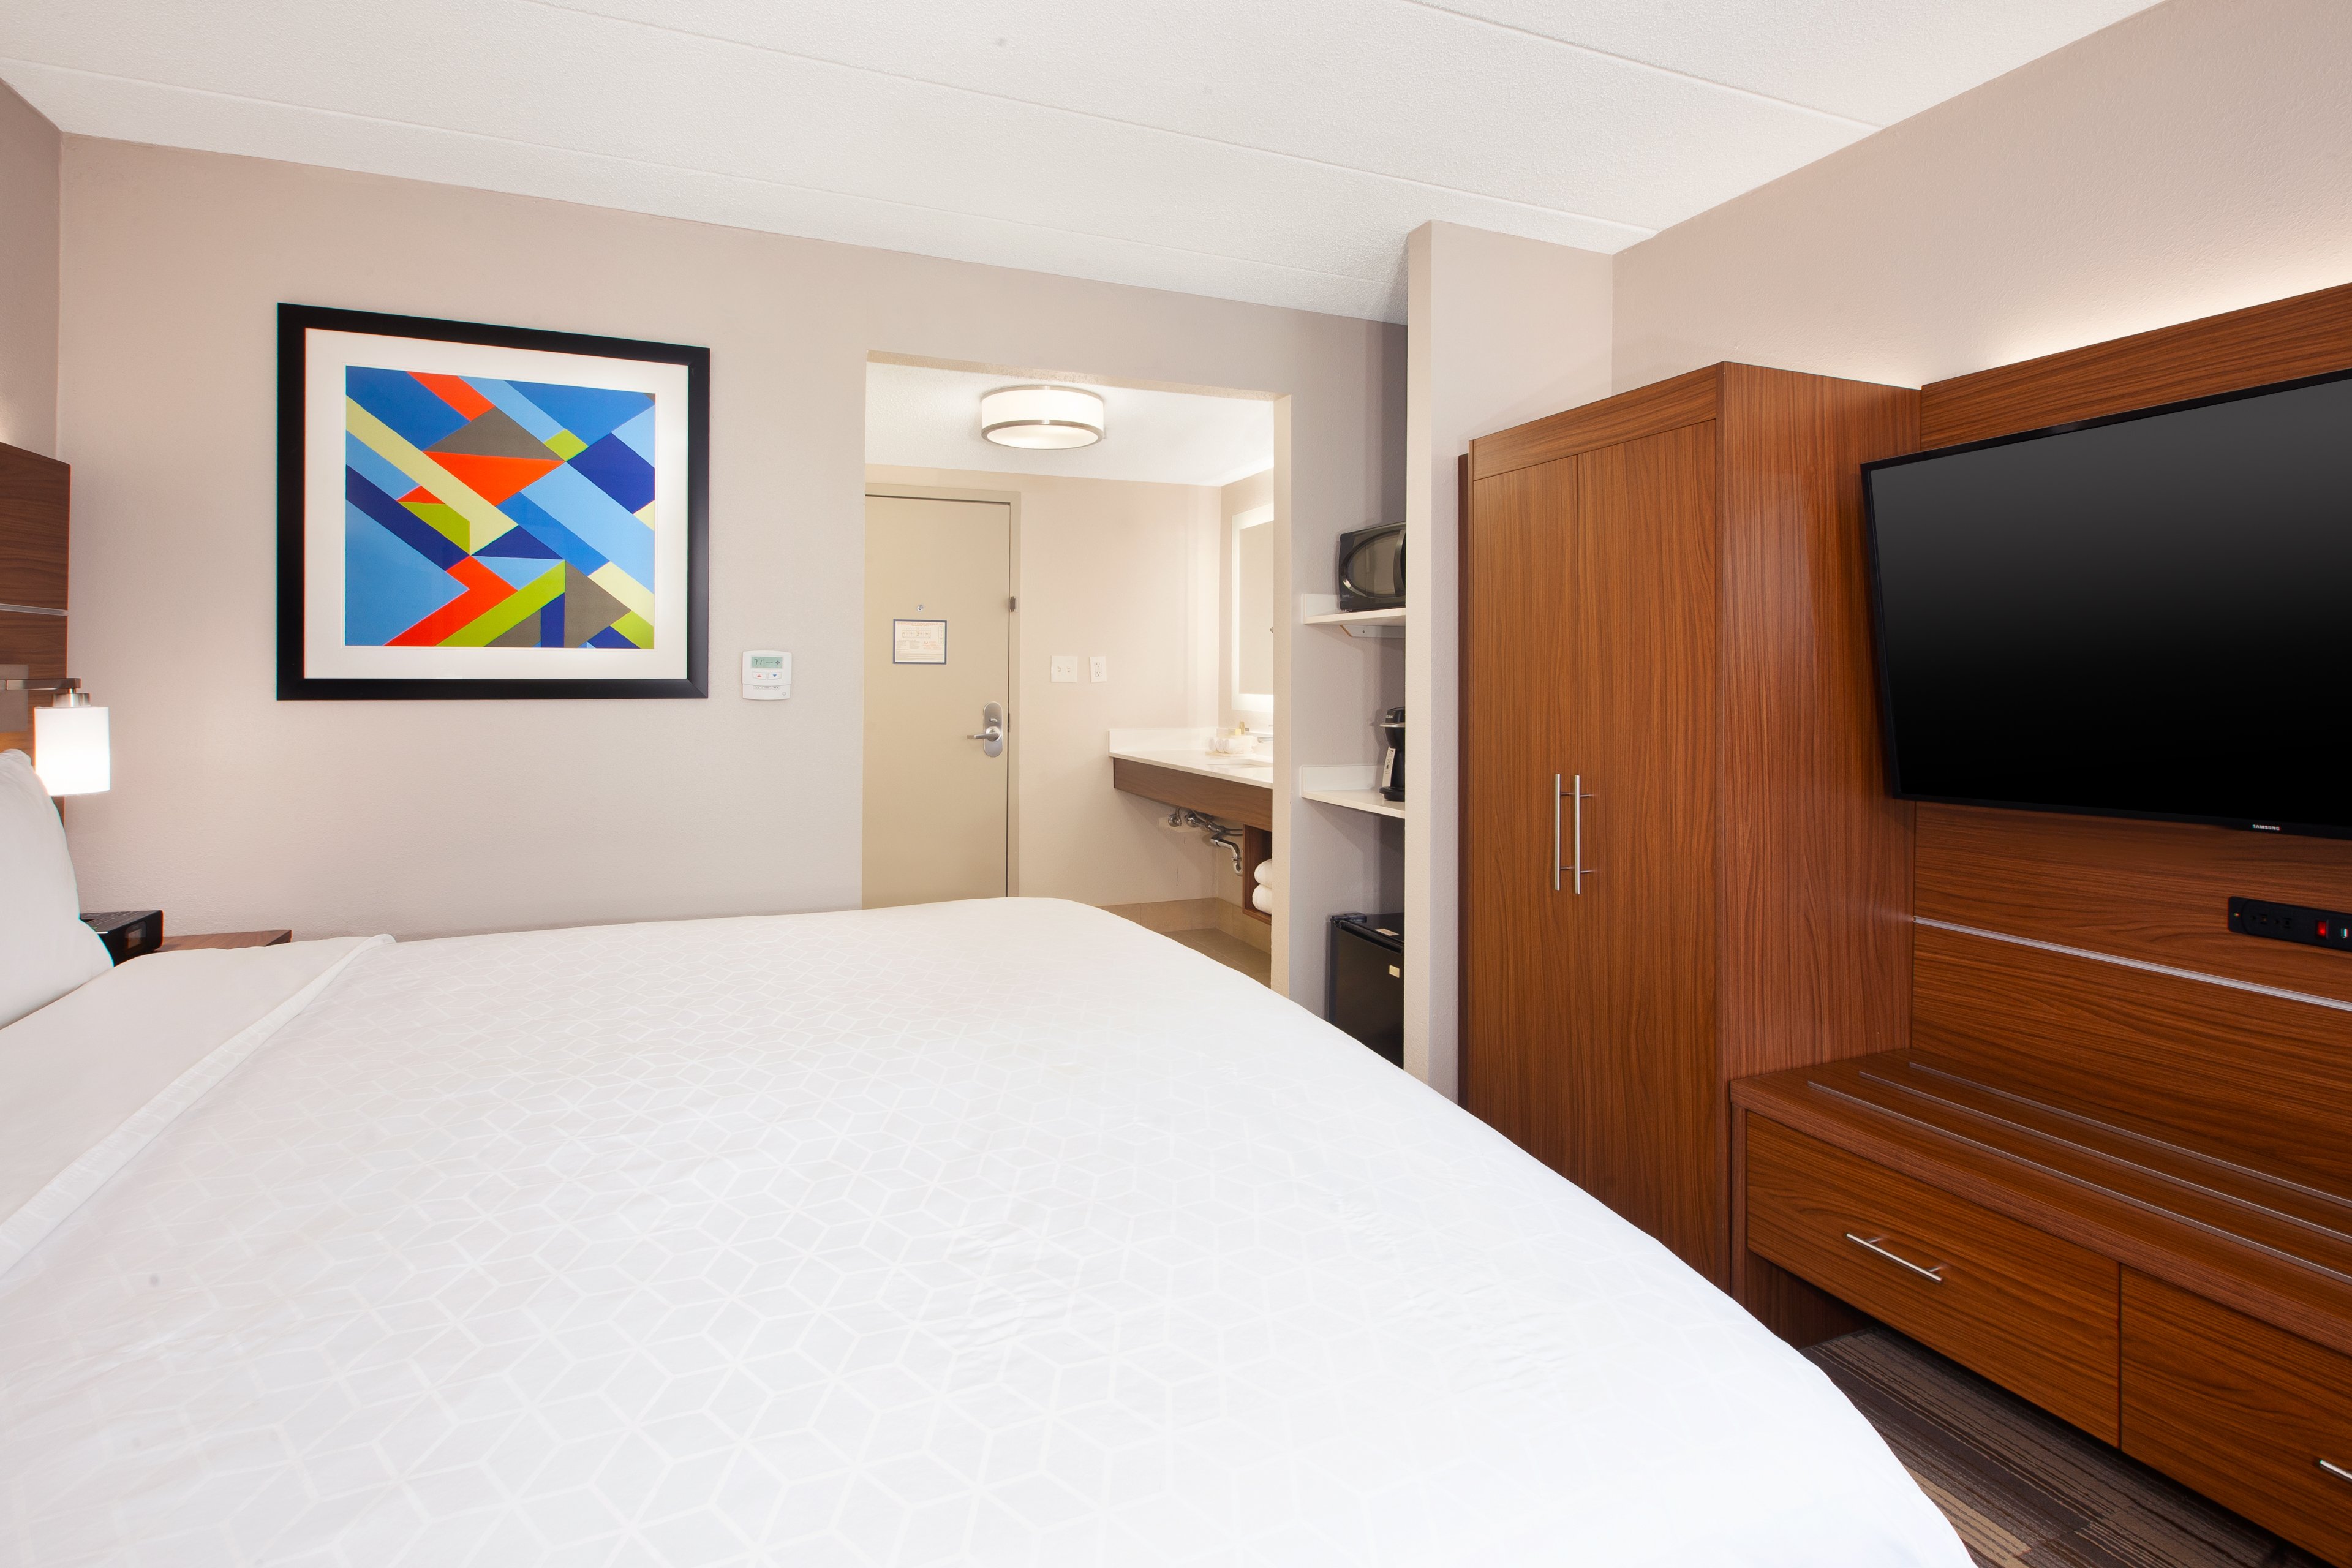 Our accessible rooms thoughtfully designed with ADA compliance.